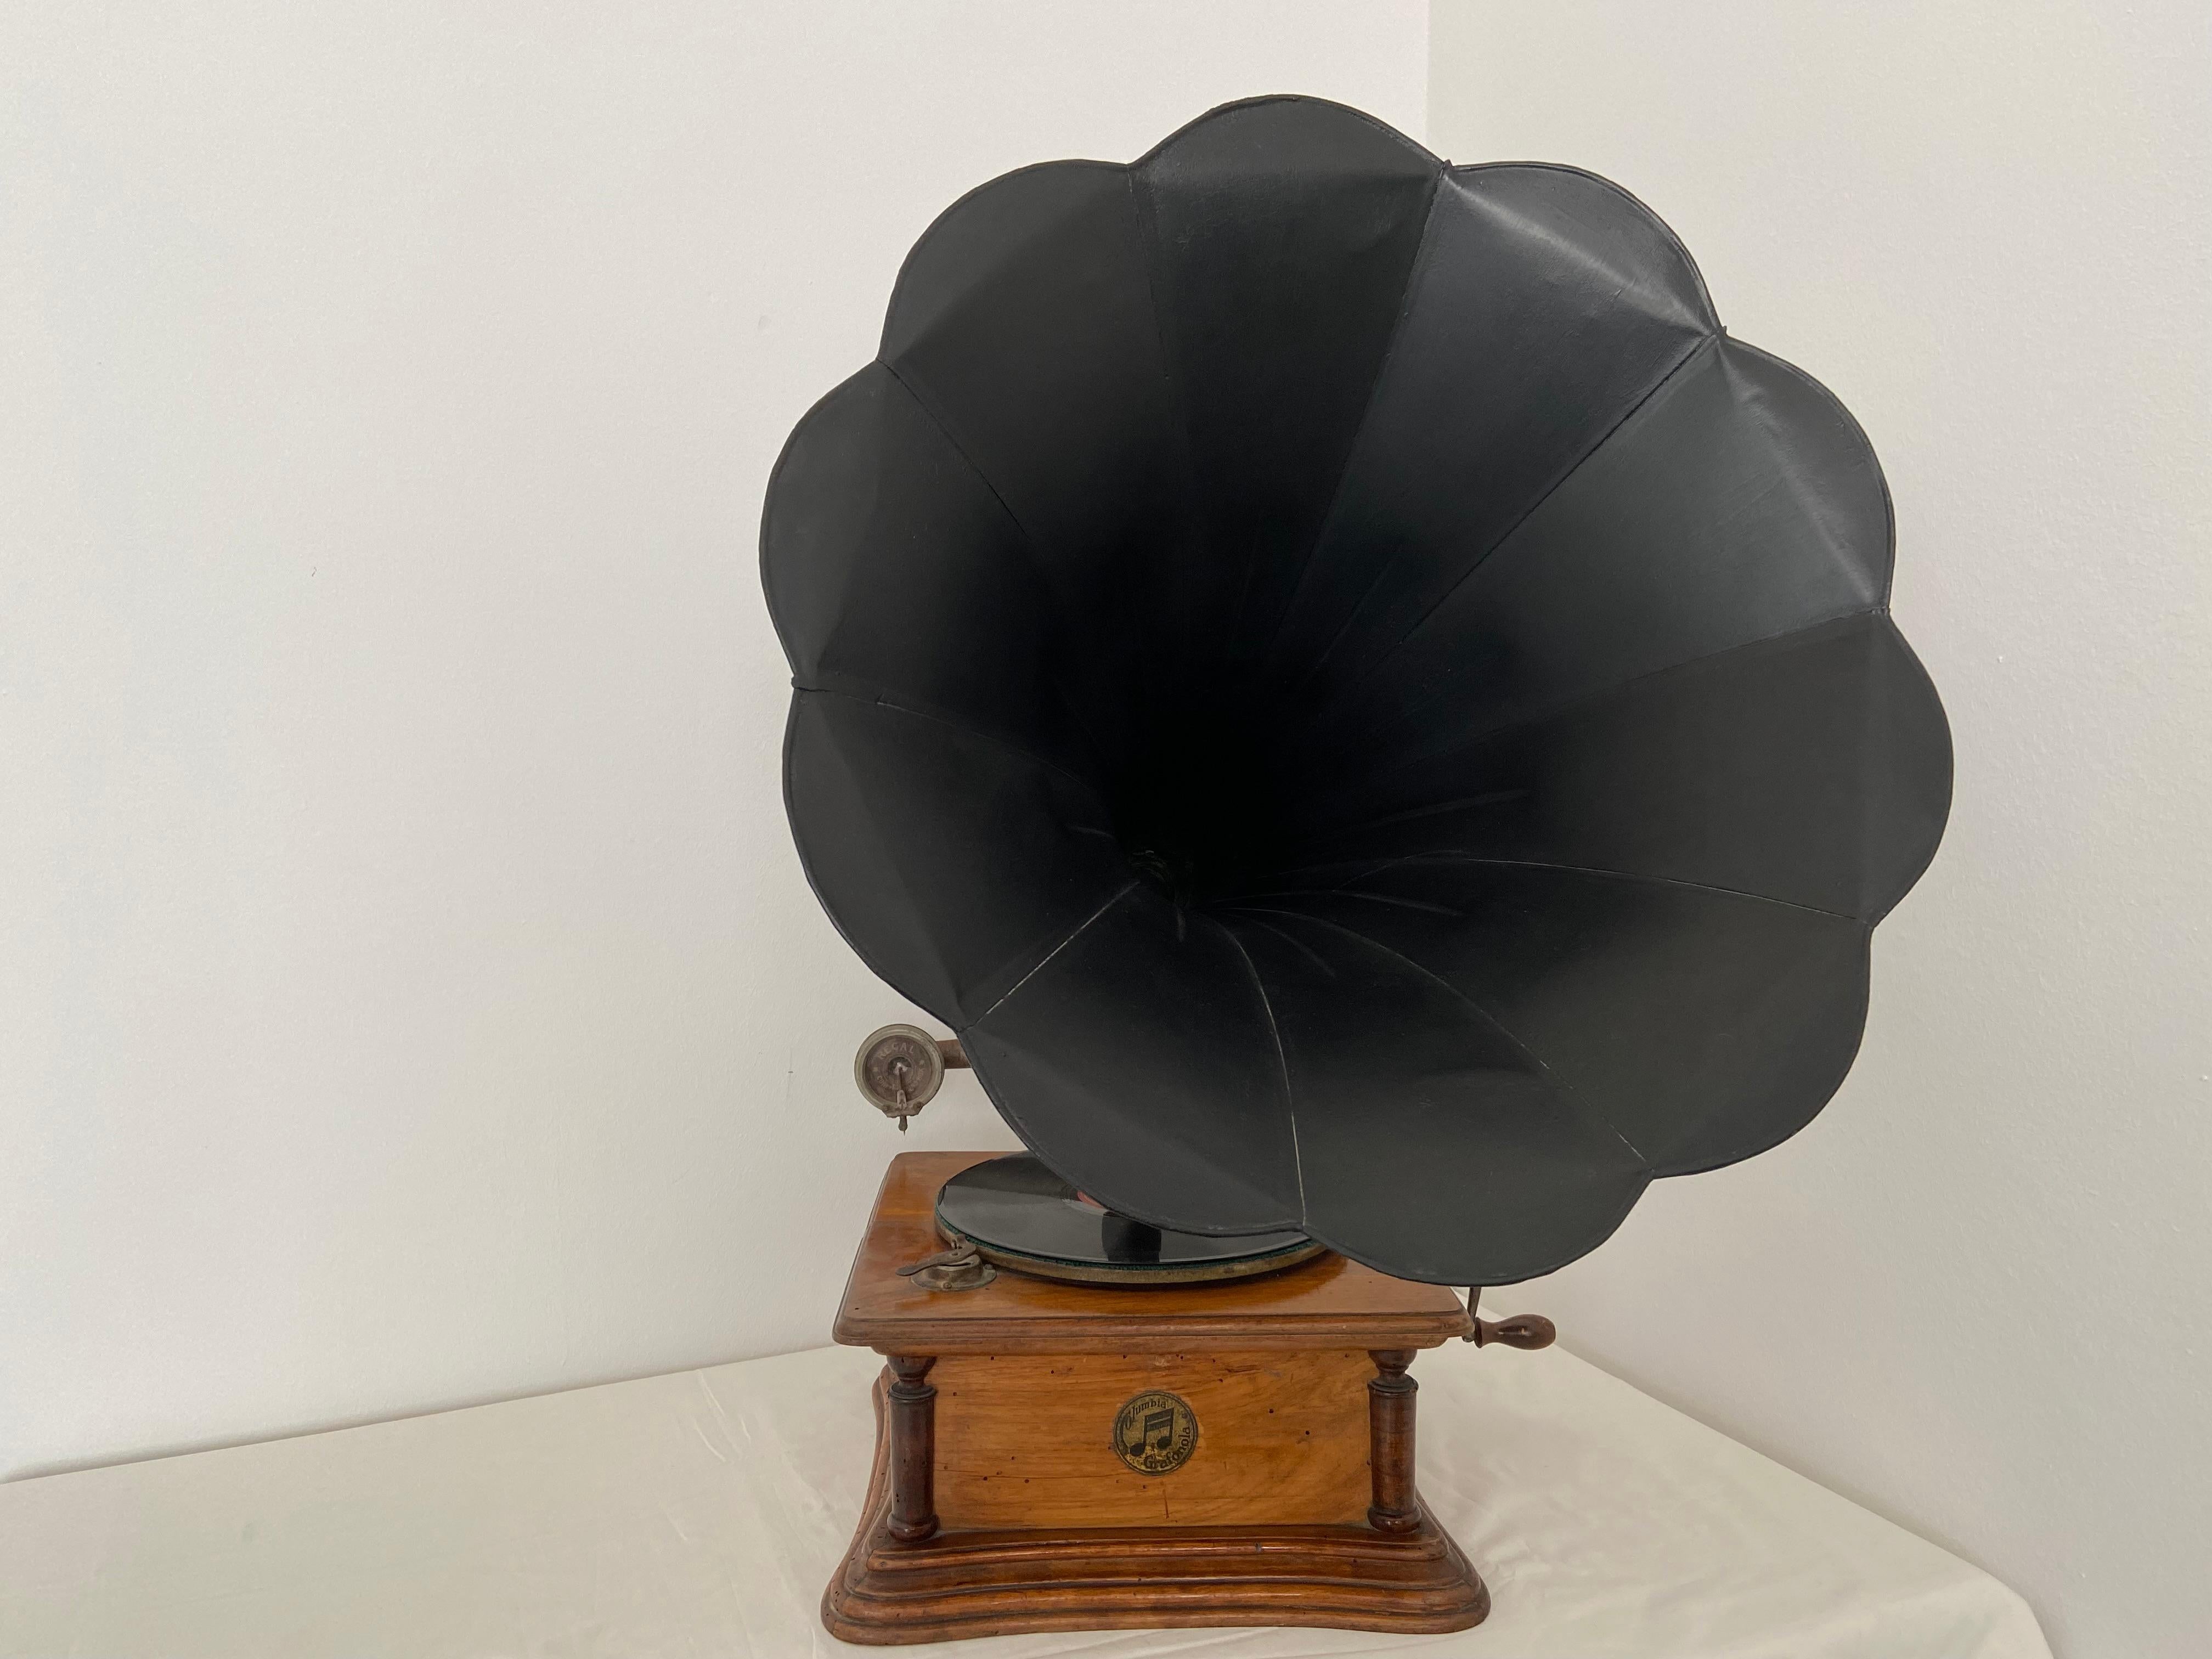 For sale, a beautiful COLUMBIA GRAFONOLA table gramophone, in mahogany wood, all original and in working order. Built in U.S.A. from the AMERICAN COLUMBIA GRAFONOLAS this model was introduced in 1912, therefore this wonderful specimen can be dated